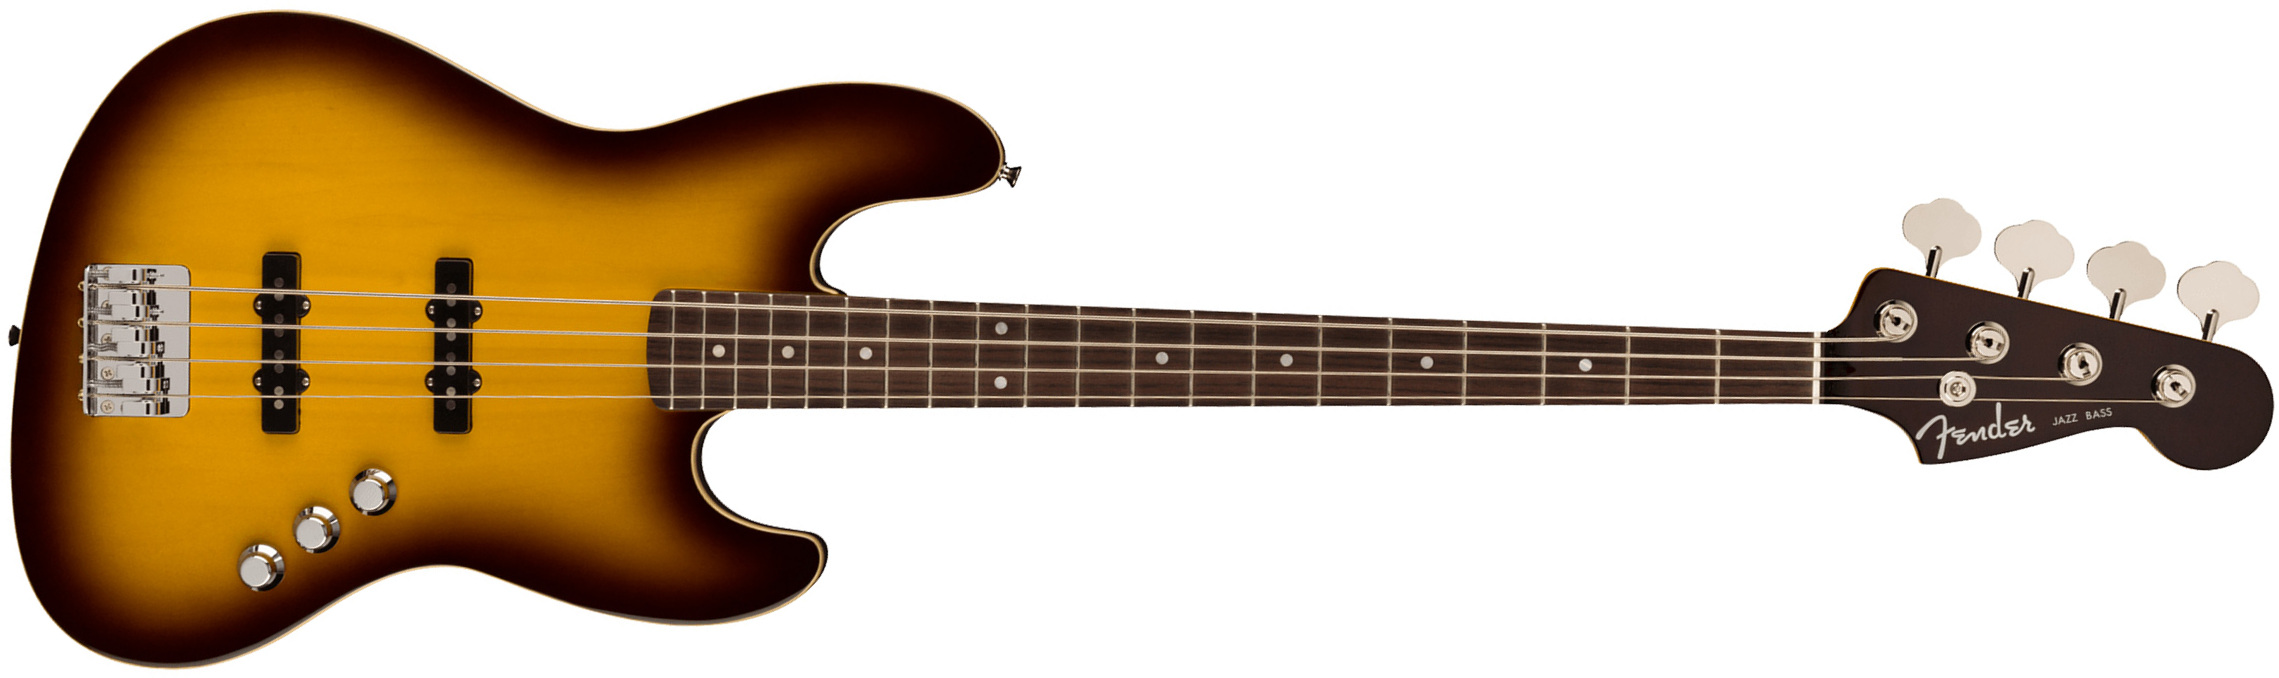 Fender Jazz Bass Aerodyne Special Jap Rw - Chocolate Burst - Solid body electric bass - Main picture